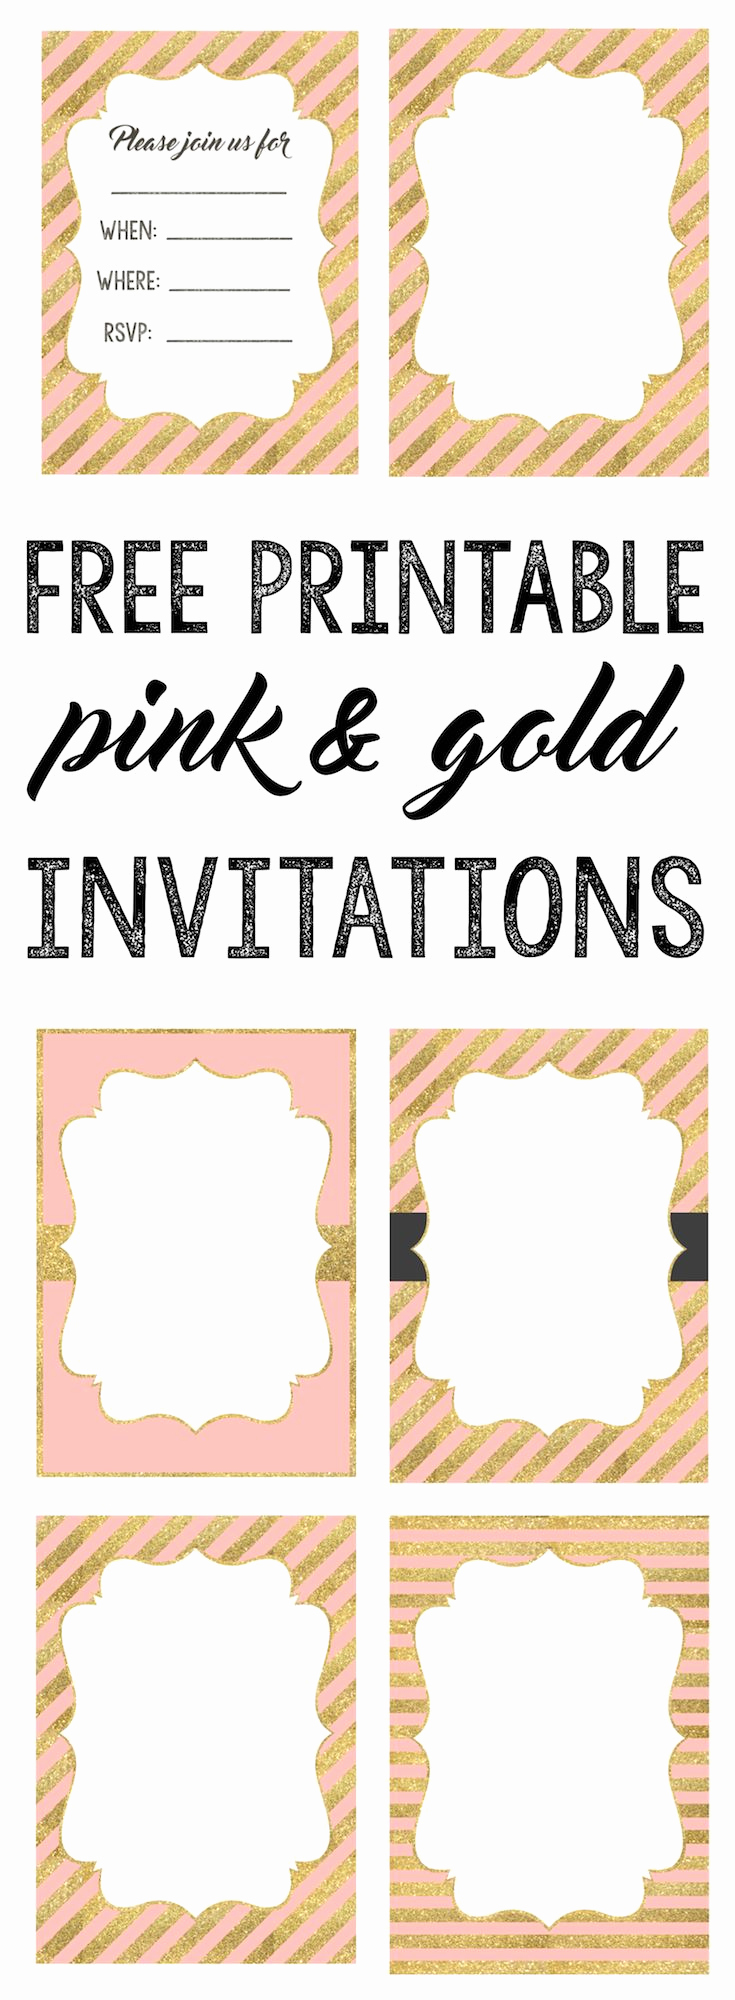 Pink and Gold Birthday Invitation Elegant Pink and Gold Invitations Free Printable Baby